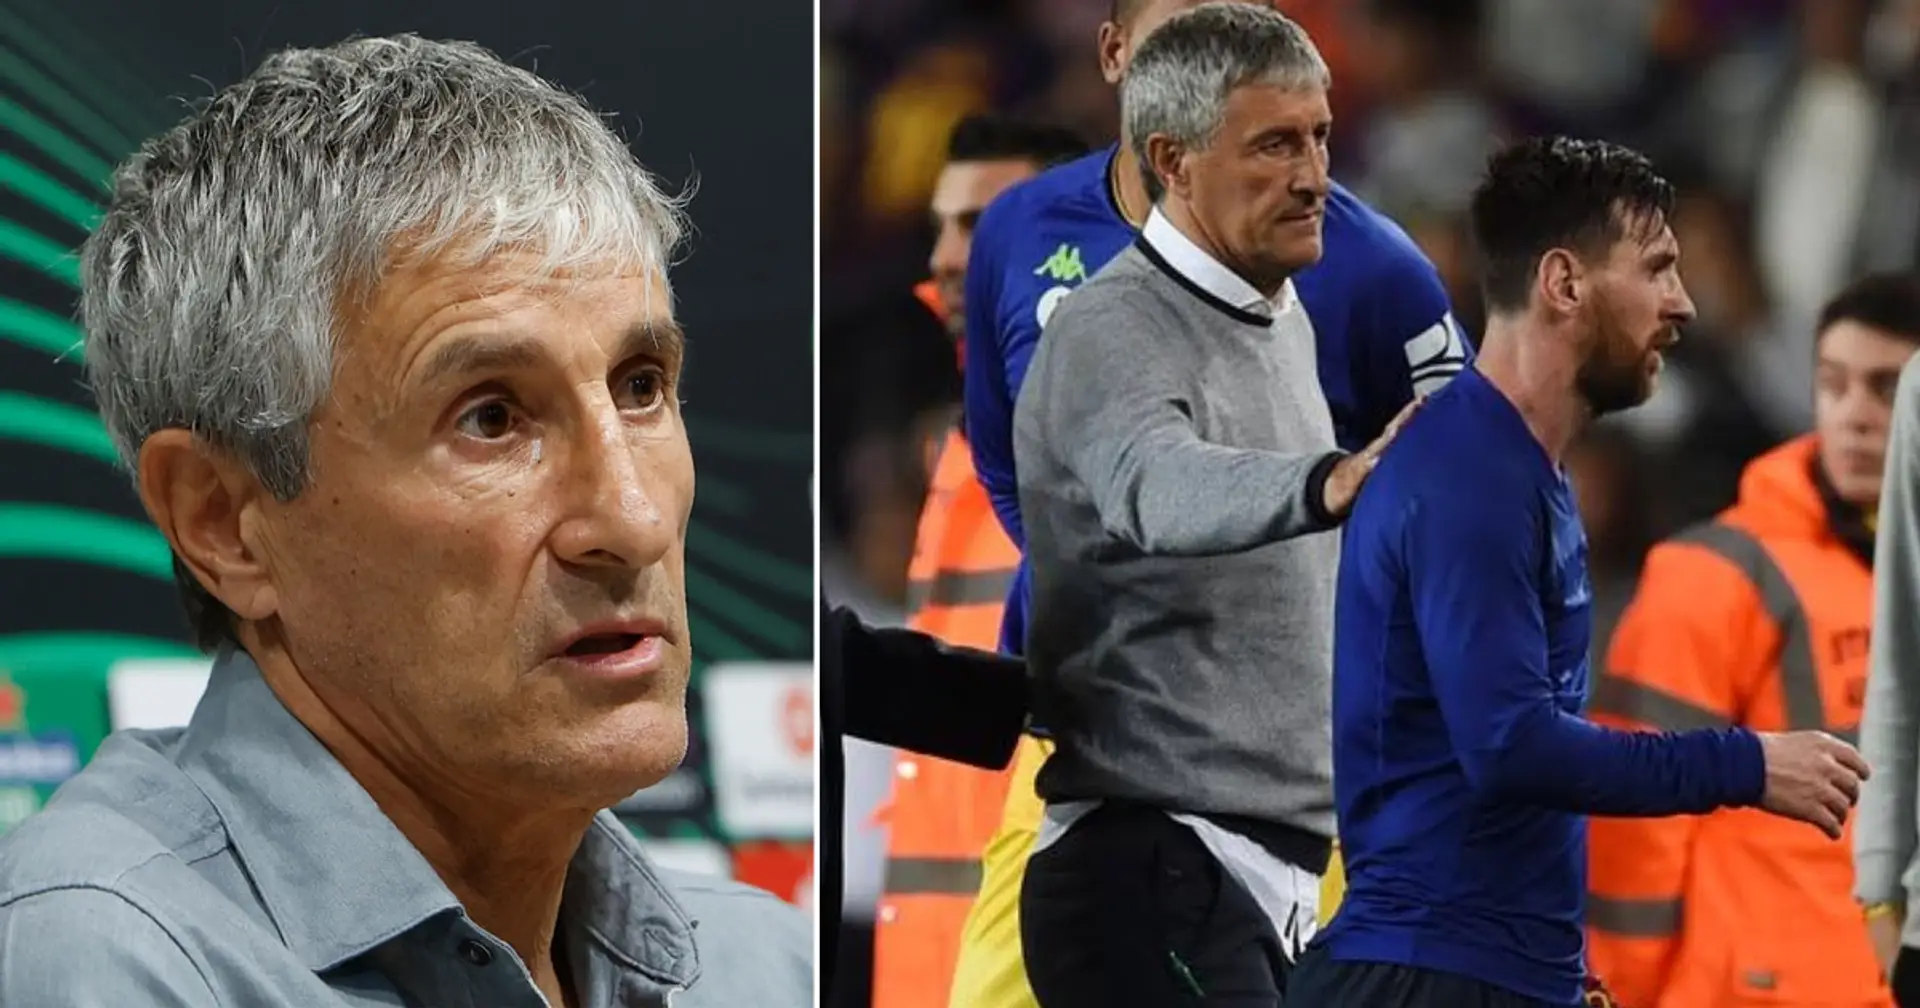 'There were things I didn't like and had to fight against': Setien sheds light on tense relationship with Messi